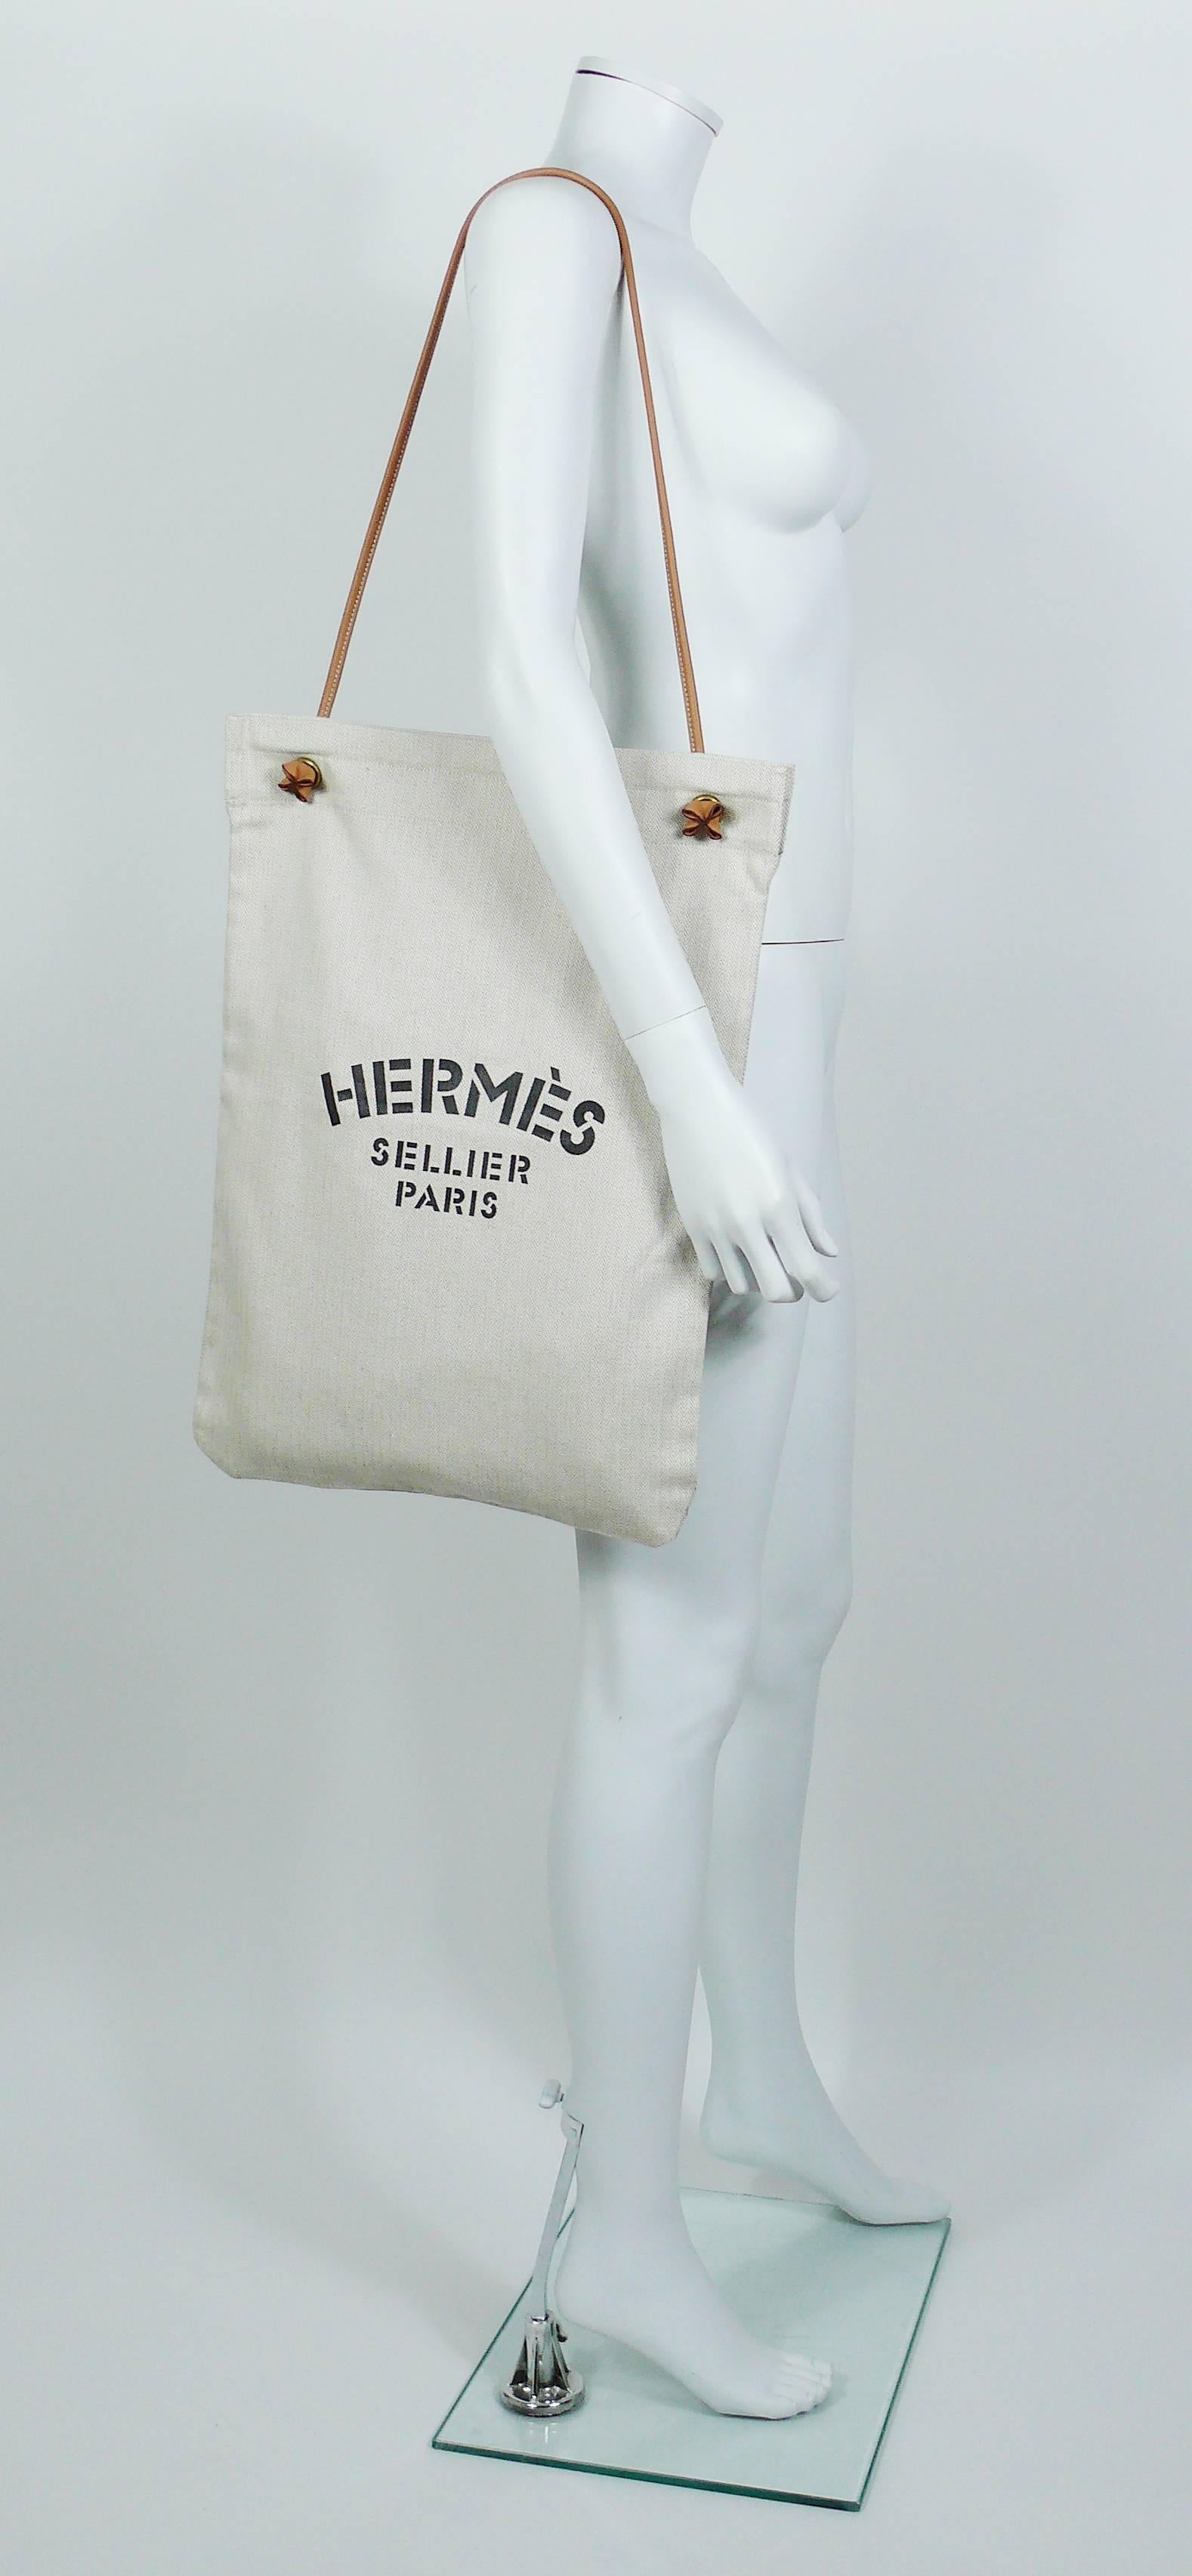 HERMES vintage Aline XL chevon canvas tote bag with "HERMES Sellier Paris" black print and brown leather strap.

Label reads HERMES Paris Made in France.

Composition : Cotton / Leather.

Indicative measurements : total height (incl.